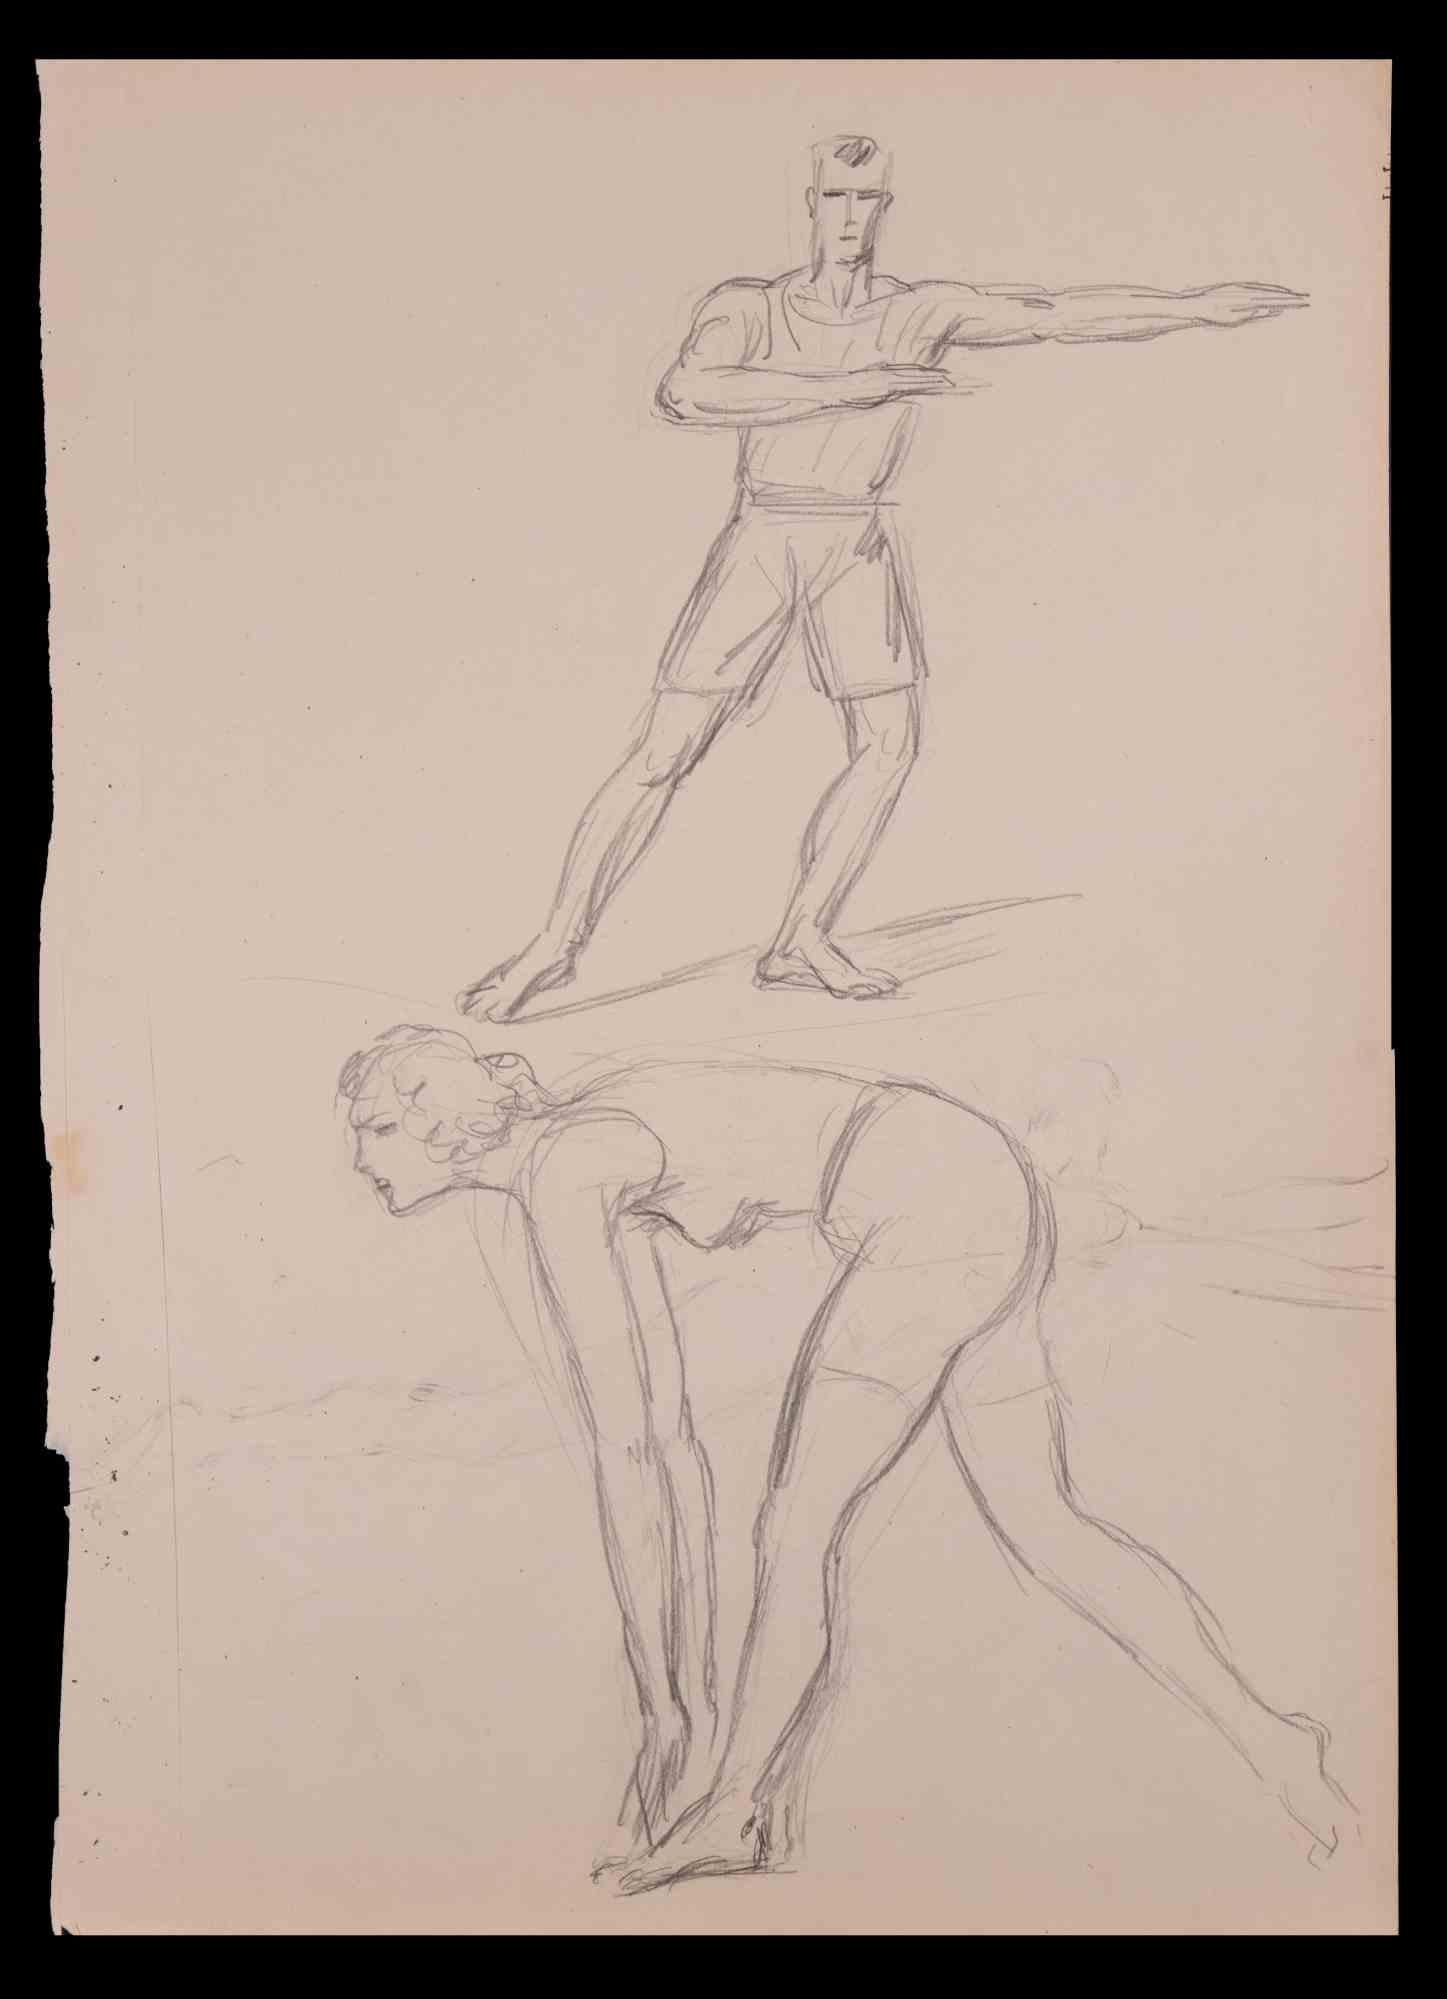 Warm-up  is an original drawing in pencil, on creamy-colored paper realized by Norbert Meyre in the early 20th Century.

Good conditions except for foxings.

The artwork is depicted through deft strokes by mastery.